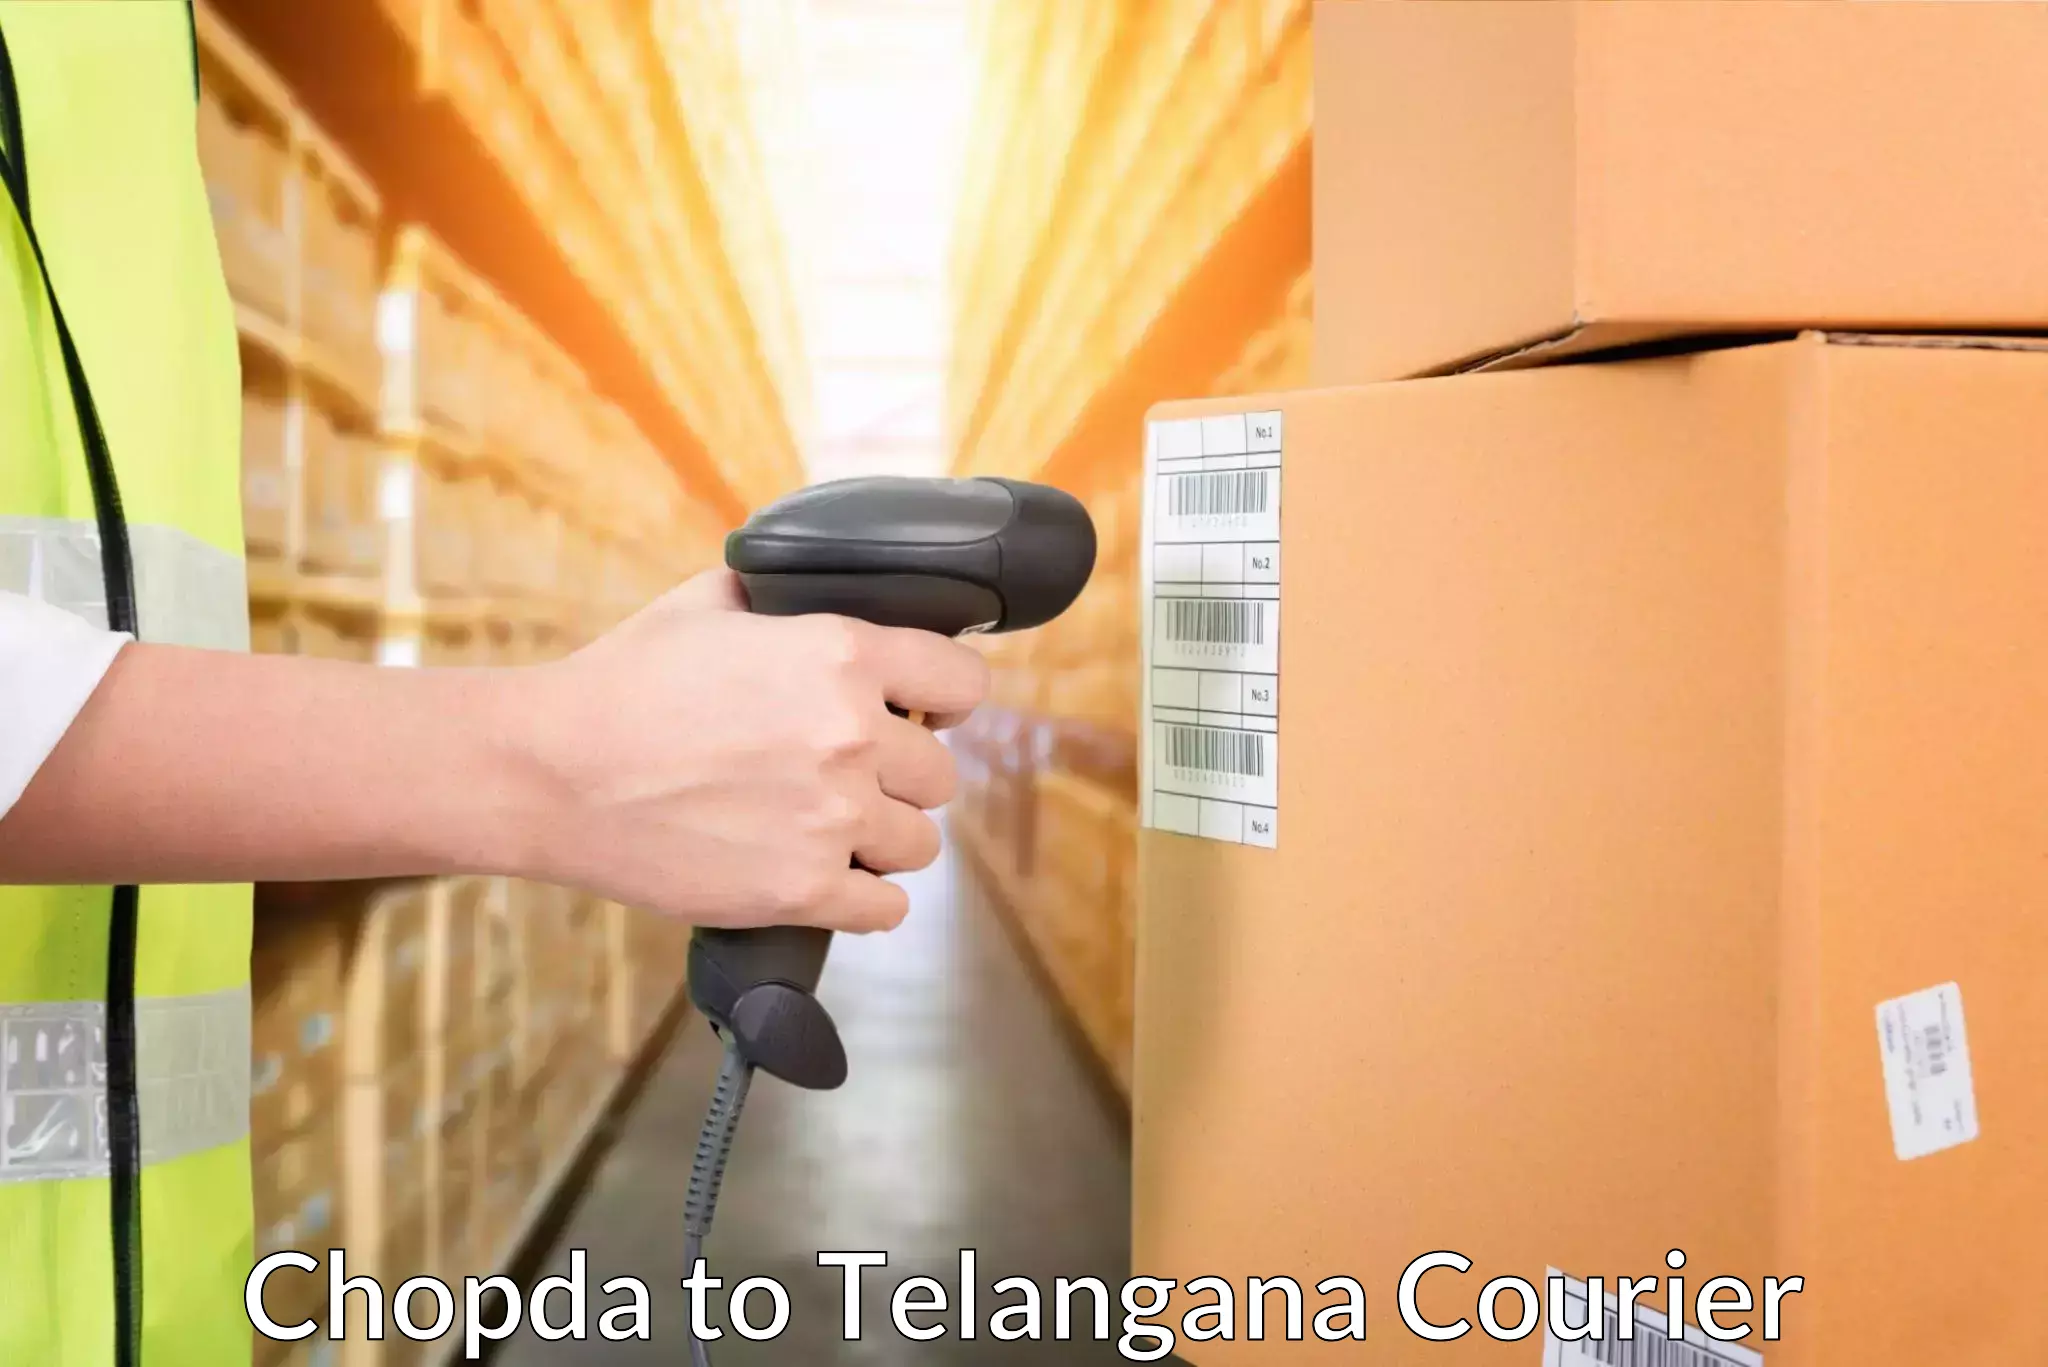 Flexible delivery scheduling Chopda to Ghanpur